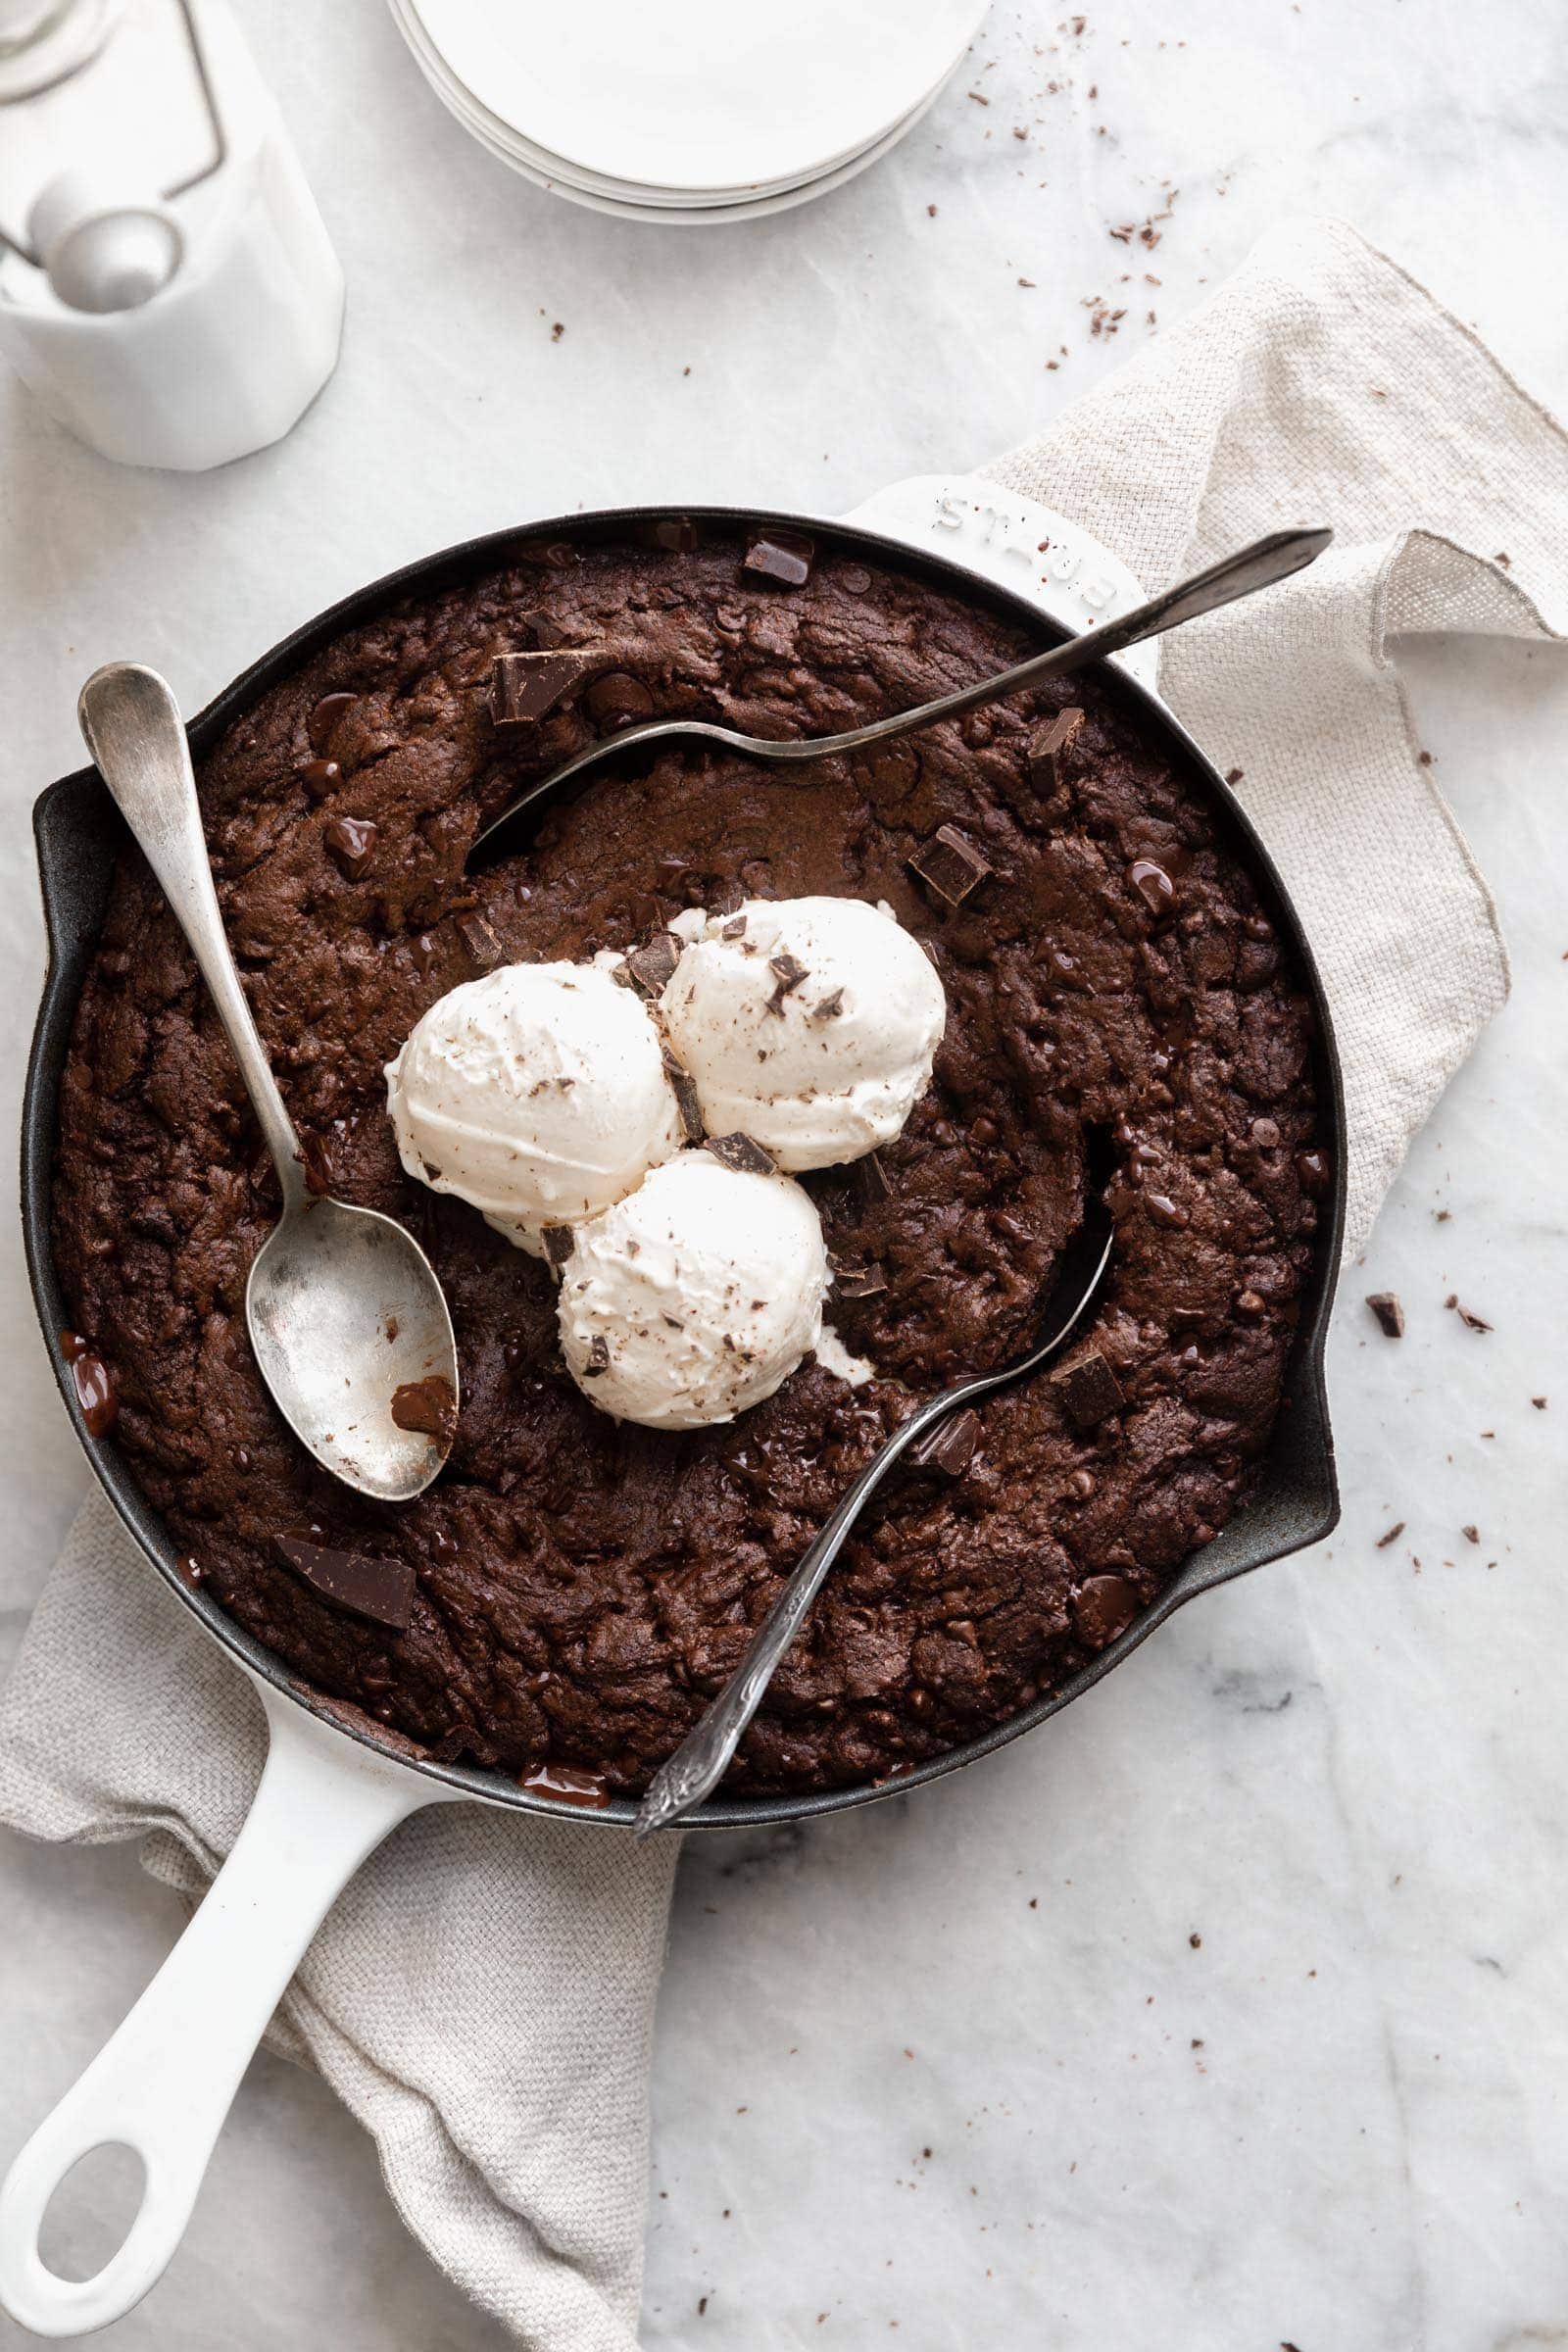 https://bromabakery.com/wp-content/uploads/2022/01/Double-Chocolate-Skillet-Cookie-3.jpg